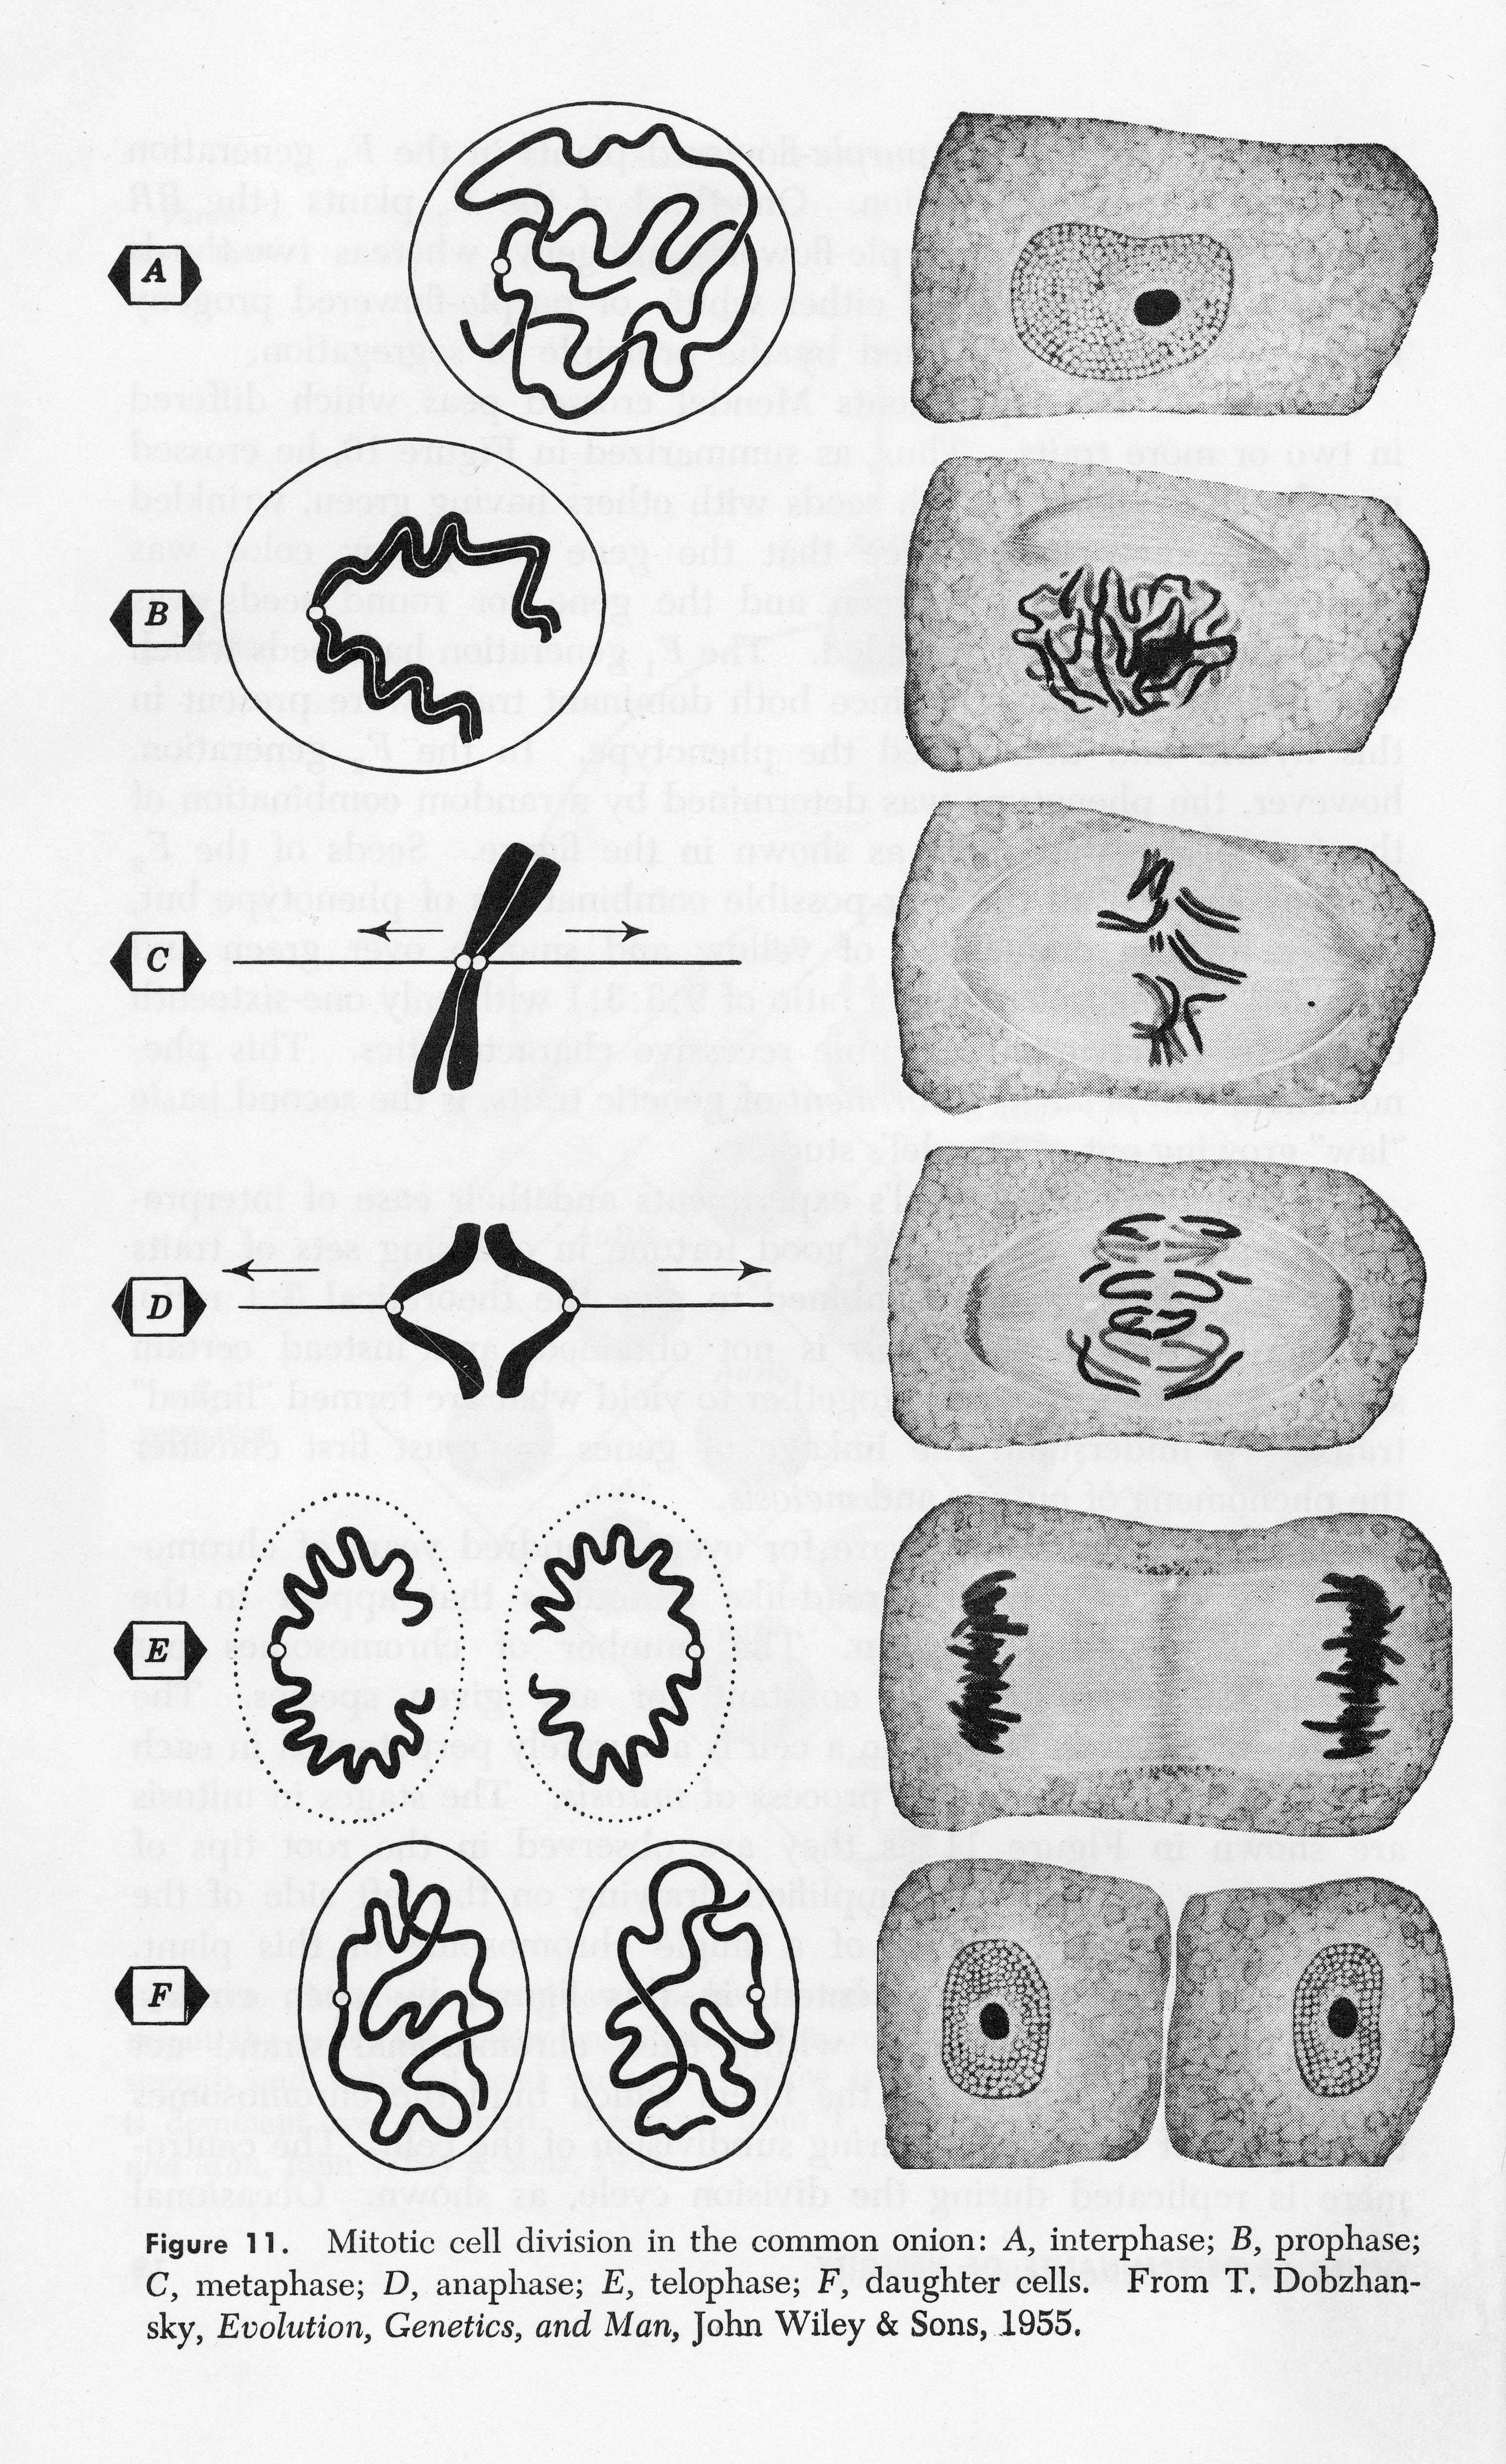 Illustrations of cells at various stages of development